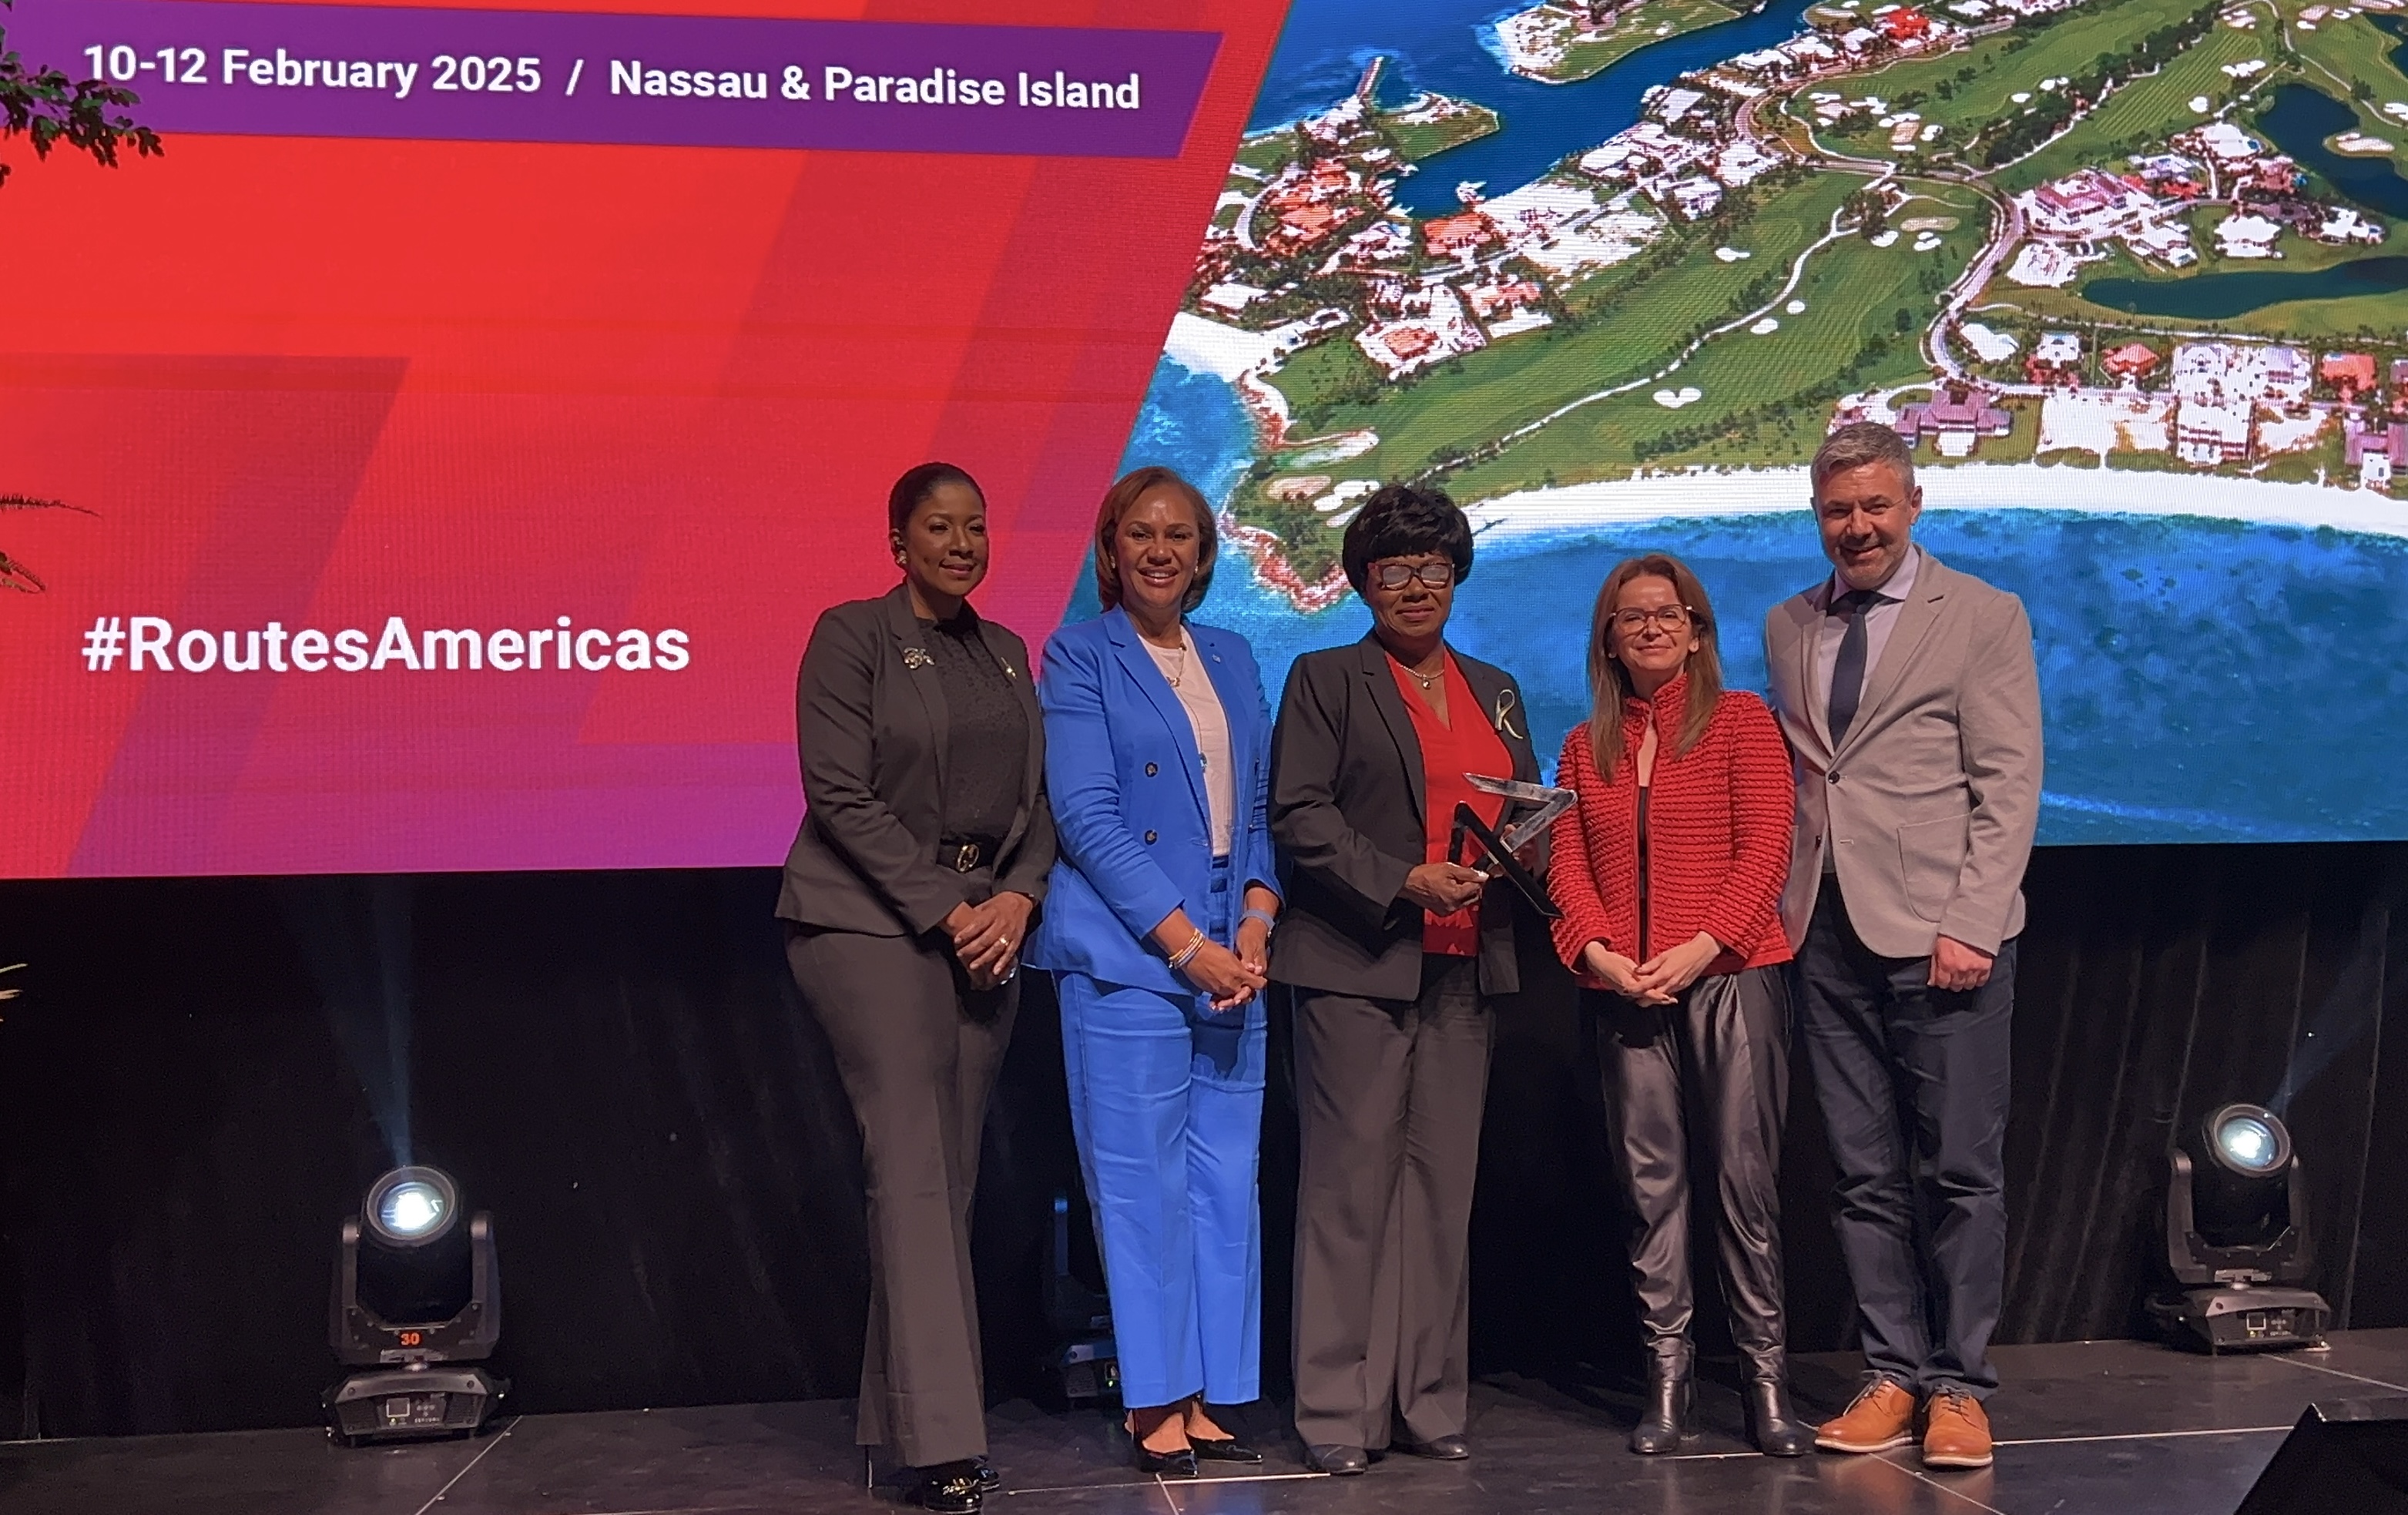 Latia Duncombe, Director General, Bahamas Ministry of Tourism, Joy Jibrilu, CEO of Nassau Paradise Island Promotion and Vernice Walkine, President & CEO, Nassau Airport Development Company accept the handover trophy as the official destination of Routes America 2025